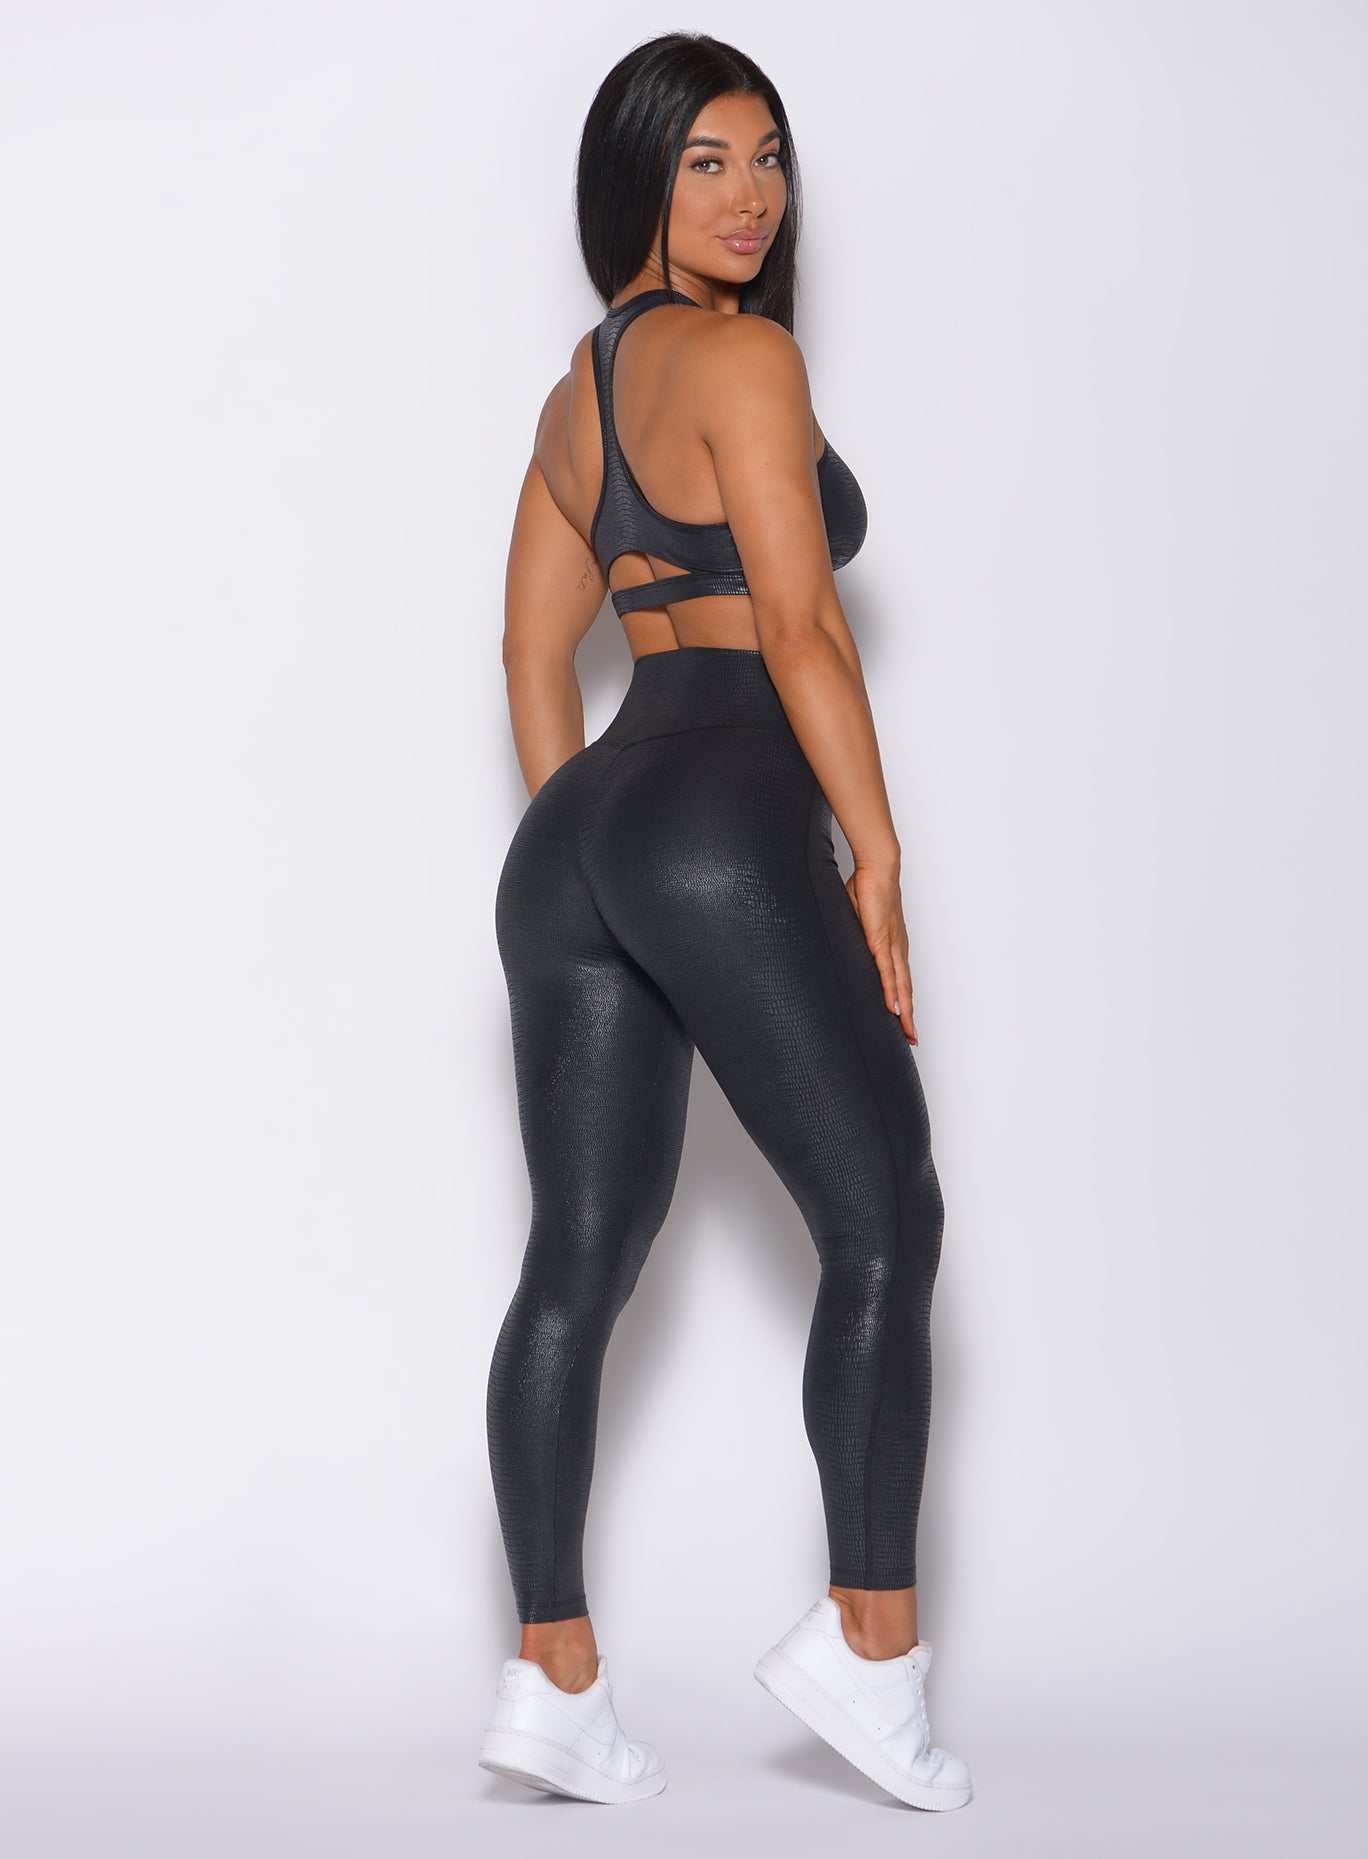 Right side profile view of a model in our shine leggings in black python color and a matching bra